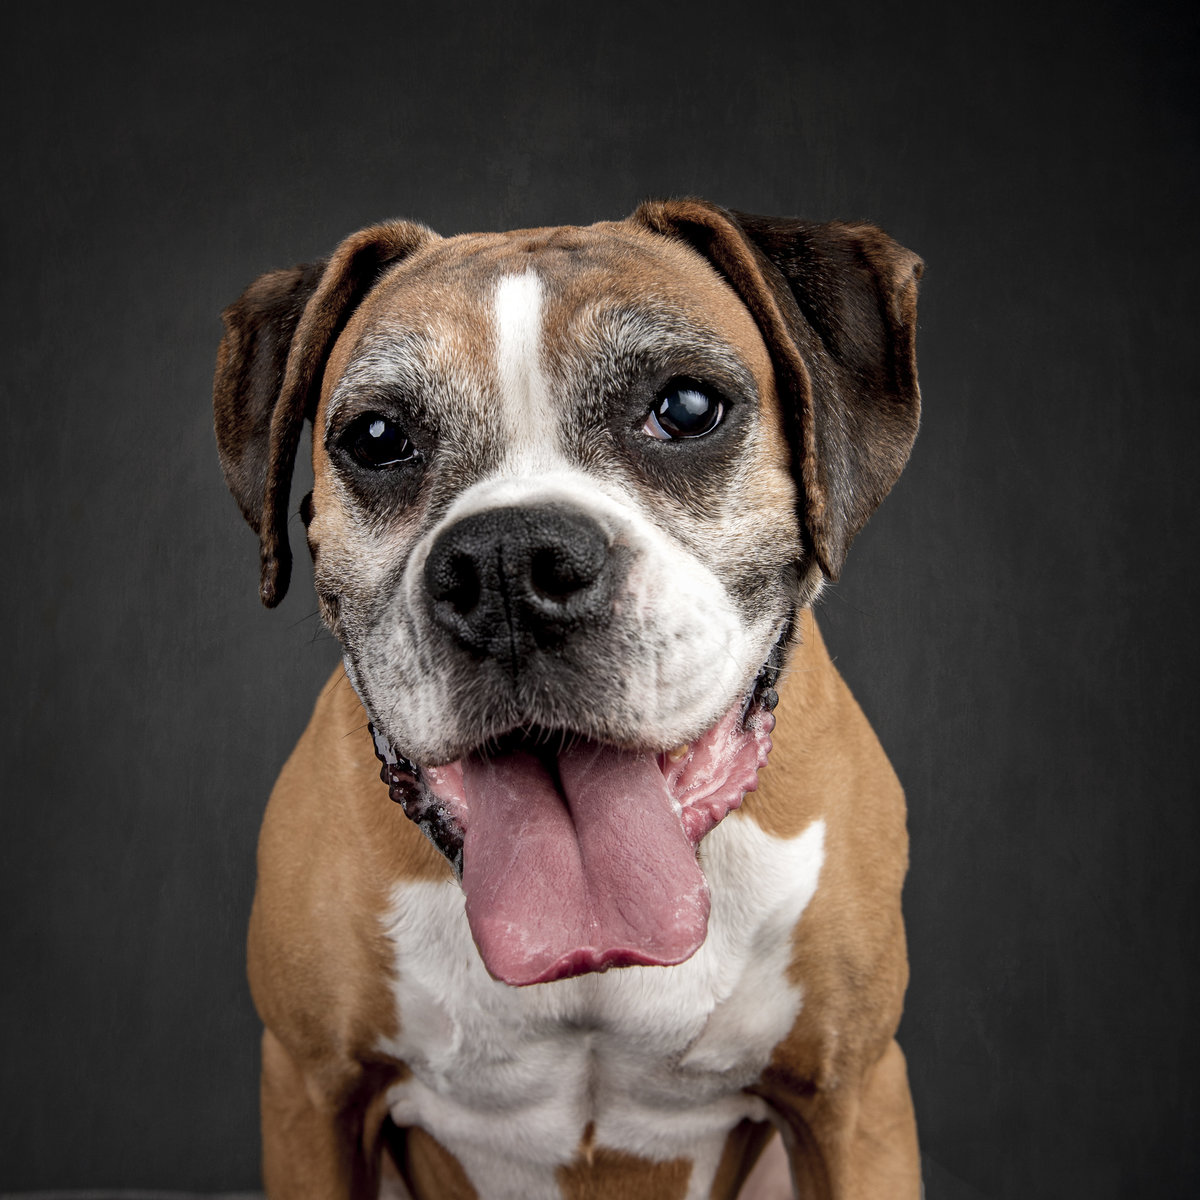 Goofy Boxer dog head and shoulders with tongue out